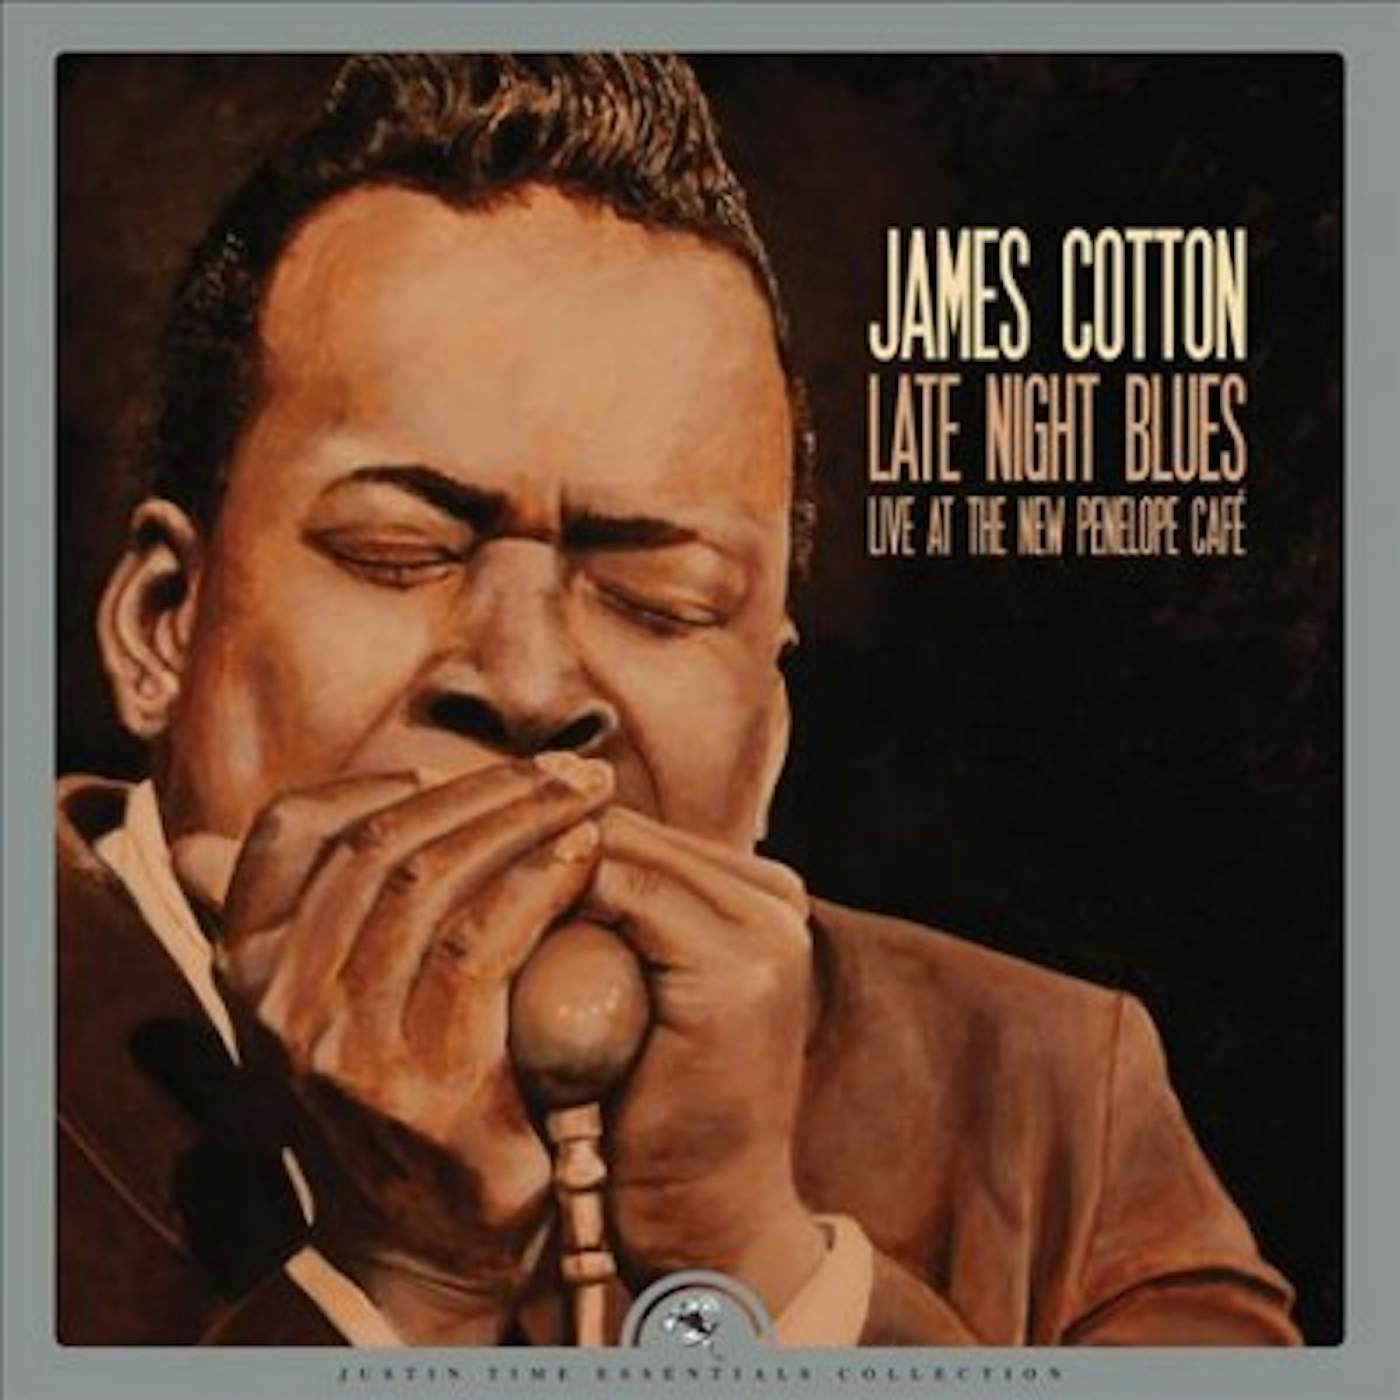 James Cotton Late Night Blues (Live at The New Penelope Cafe) Vinyl Record